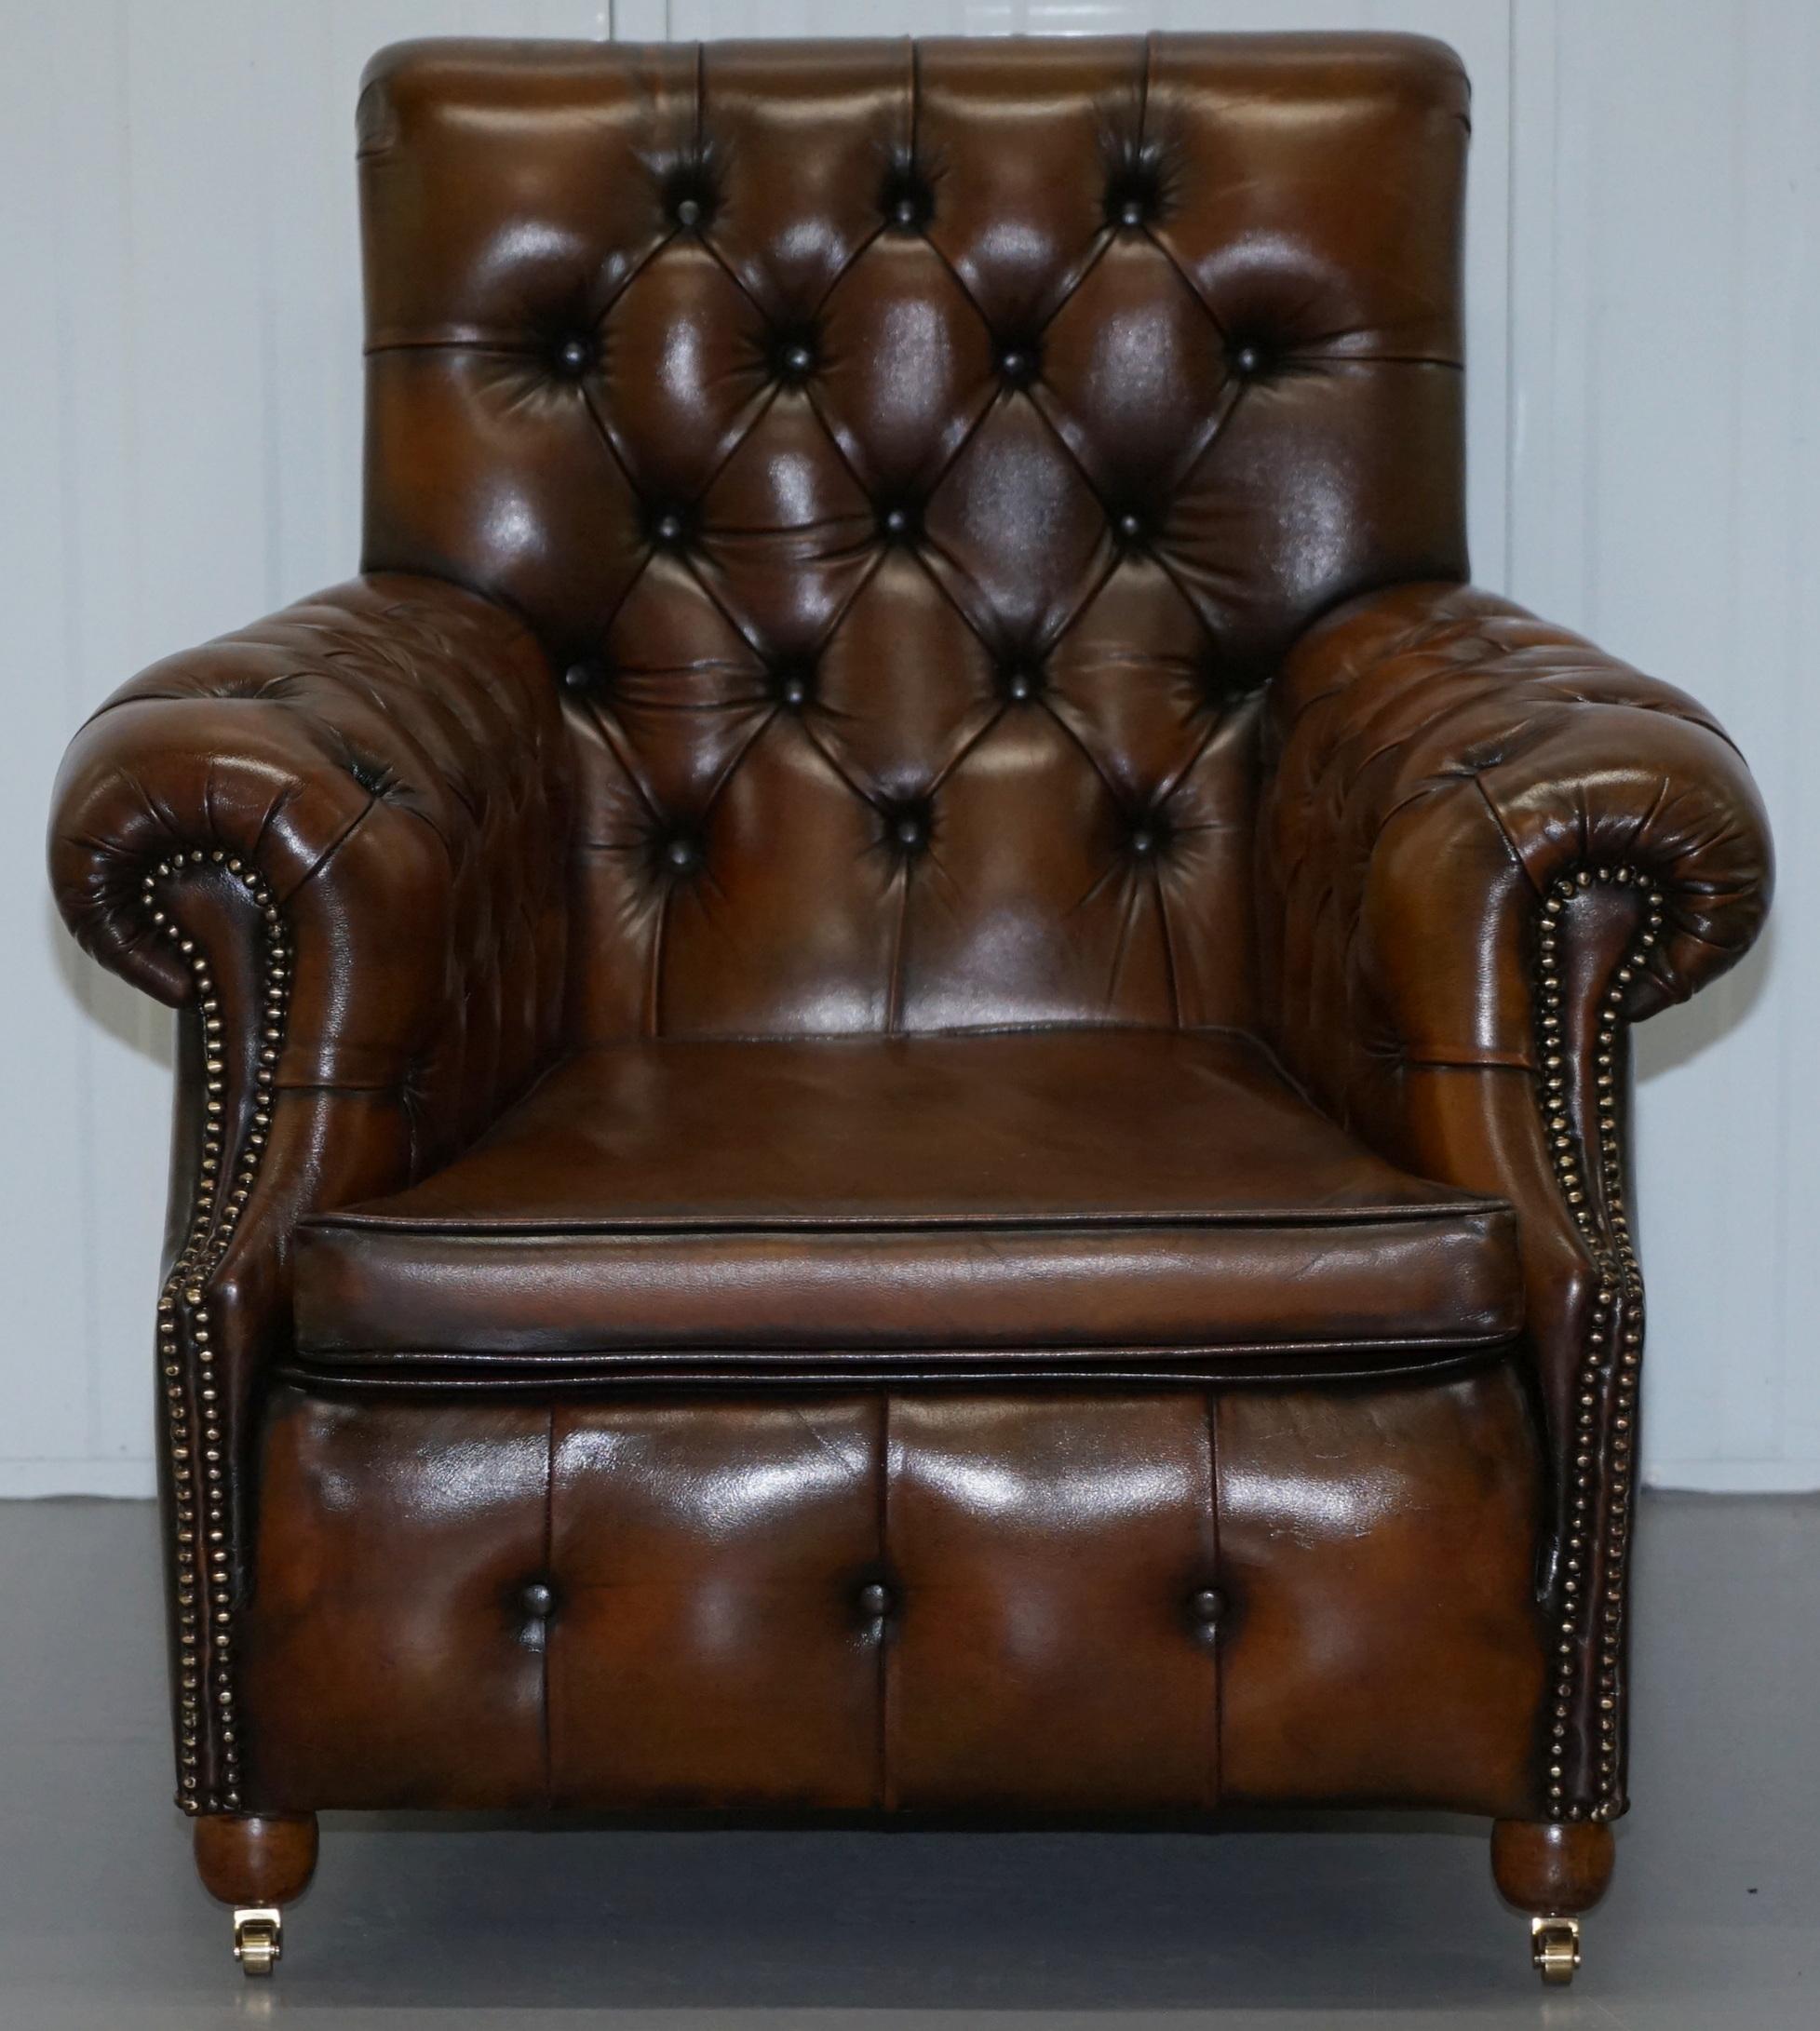 Hand-Crafted Restored Victorian Brown Leather Chesterfield Club Armchair Drop Arm Sofa Suite